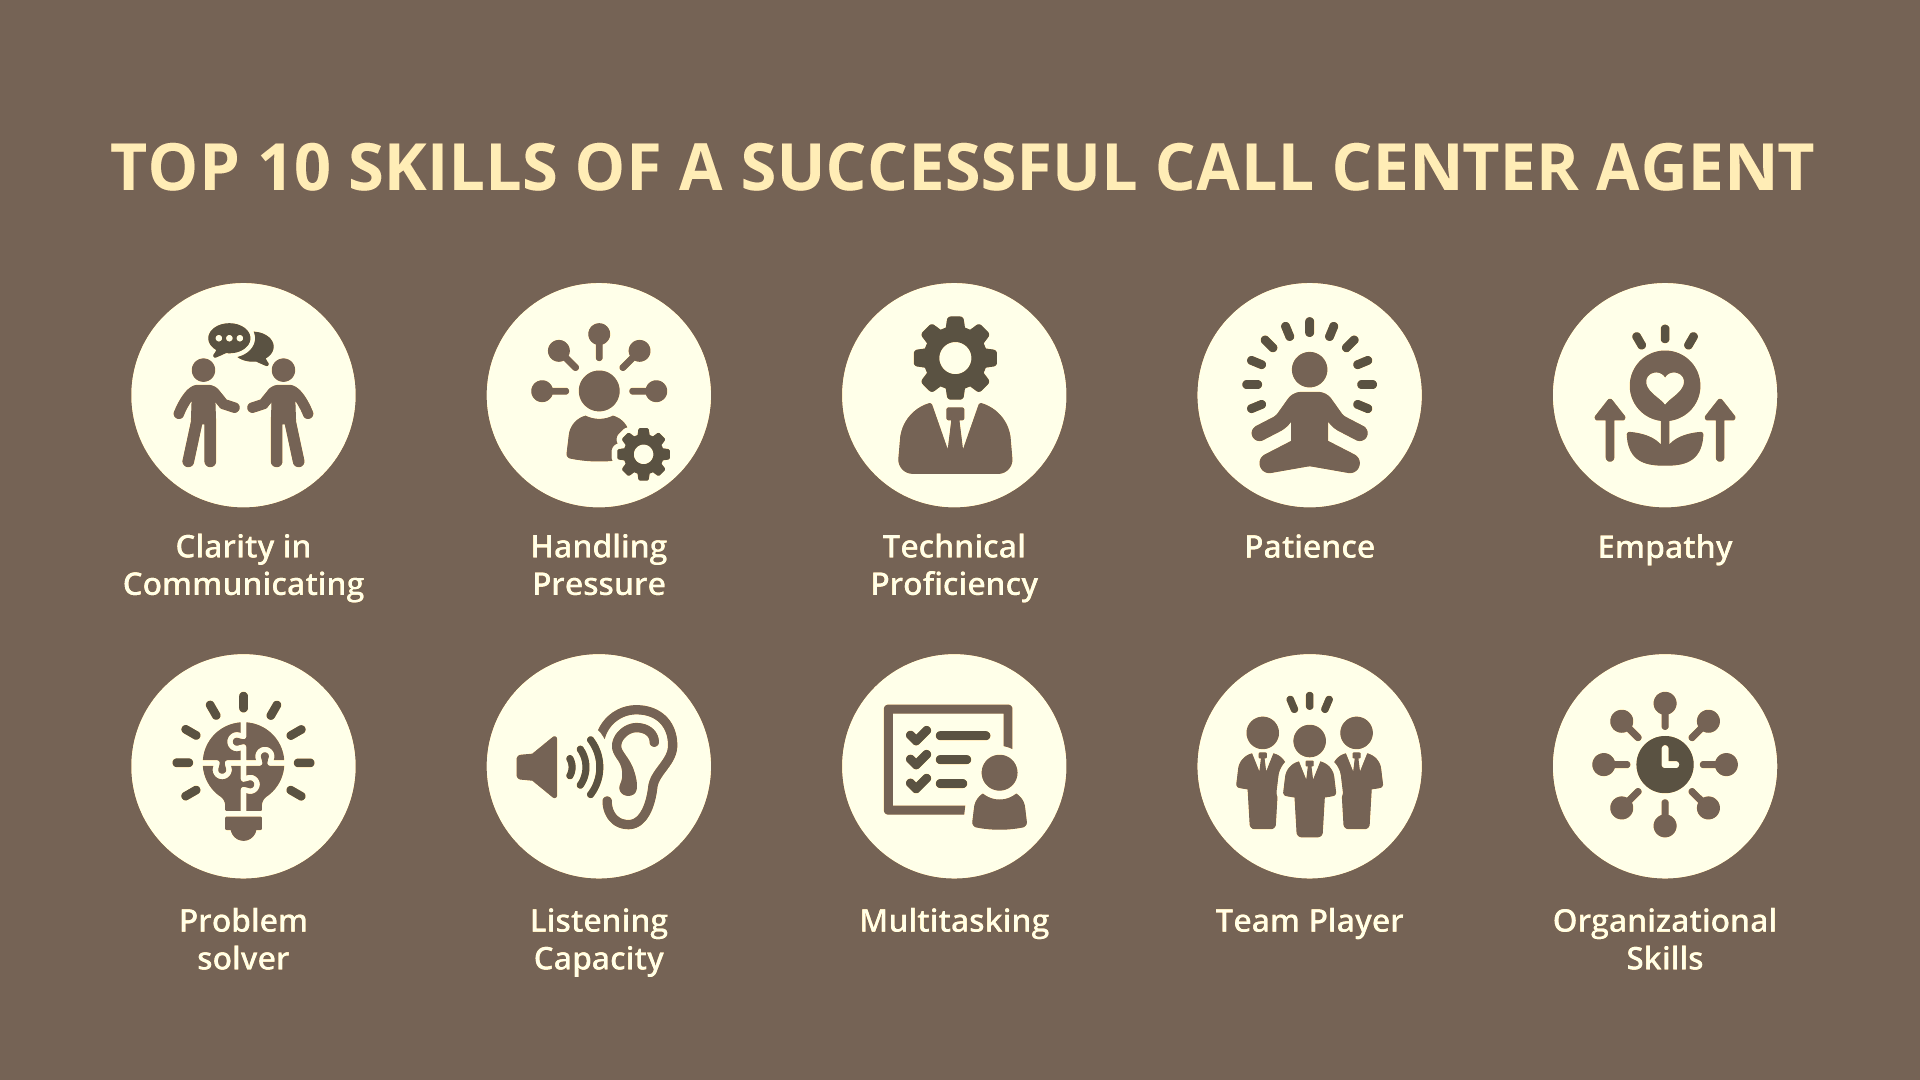 Top 10 skills of a successful call center agent